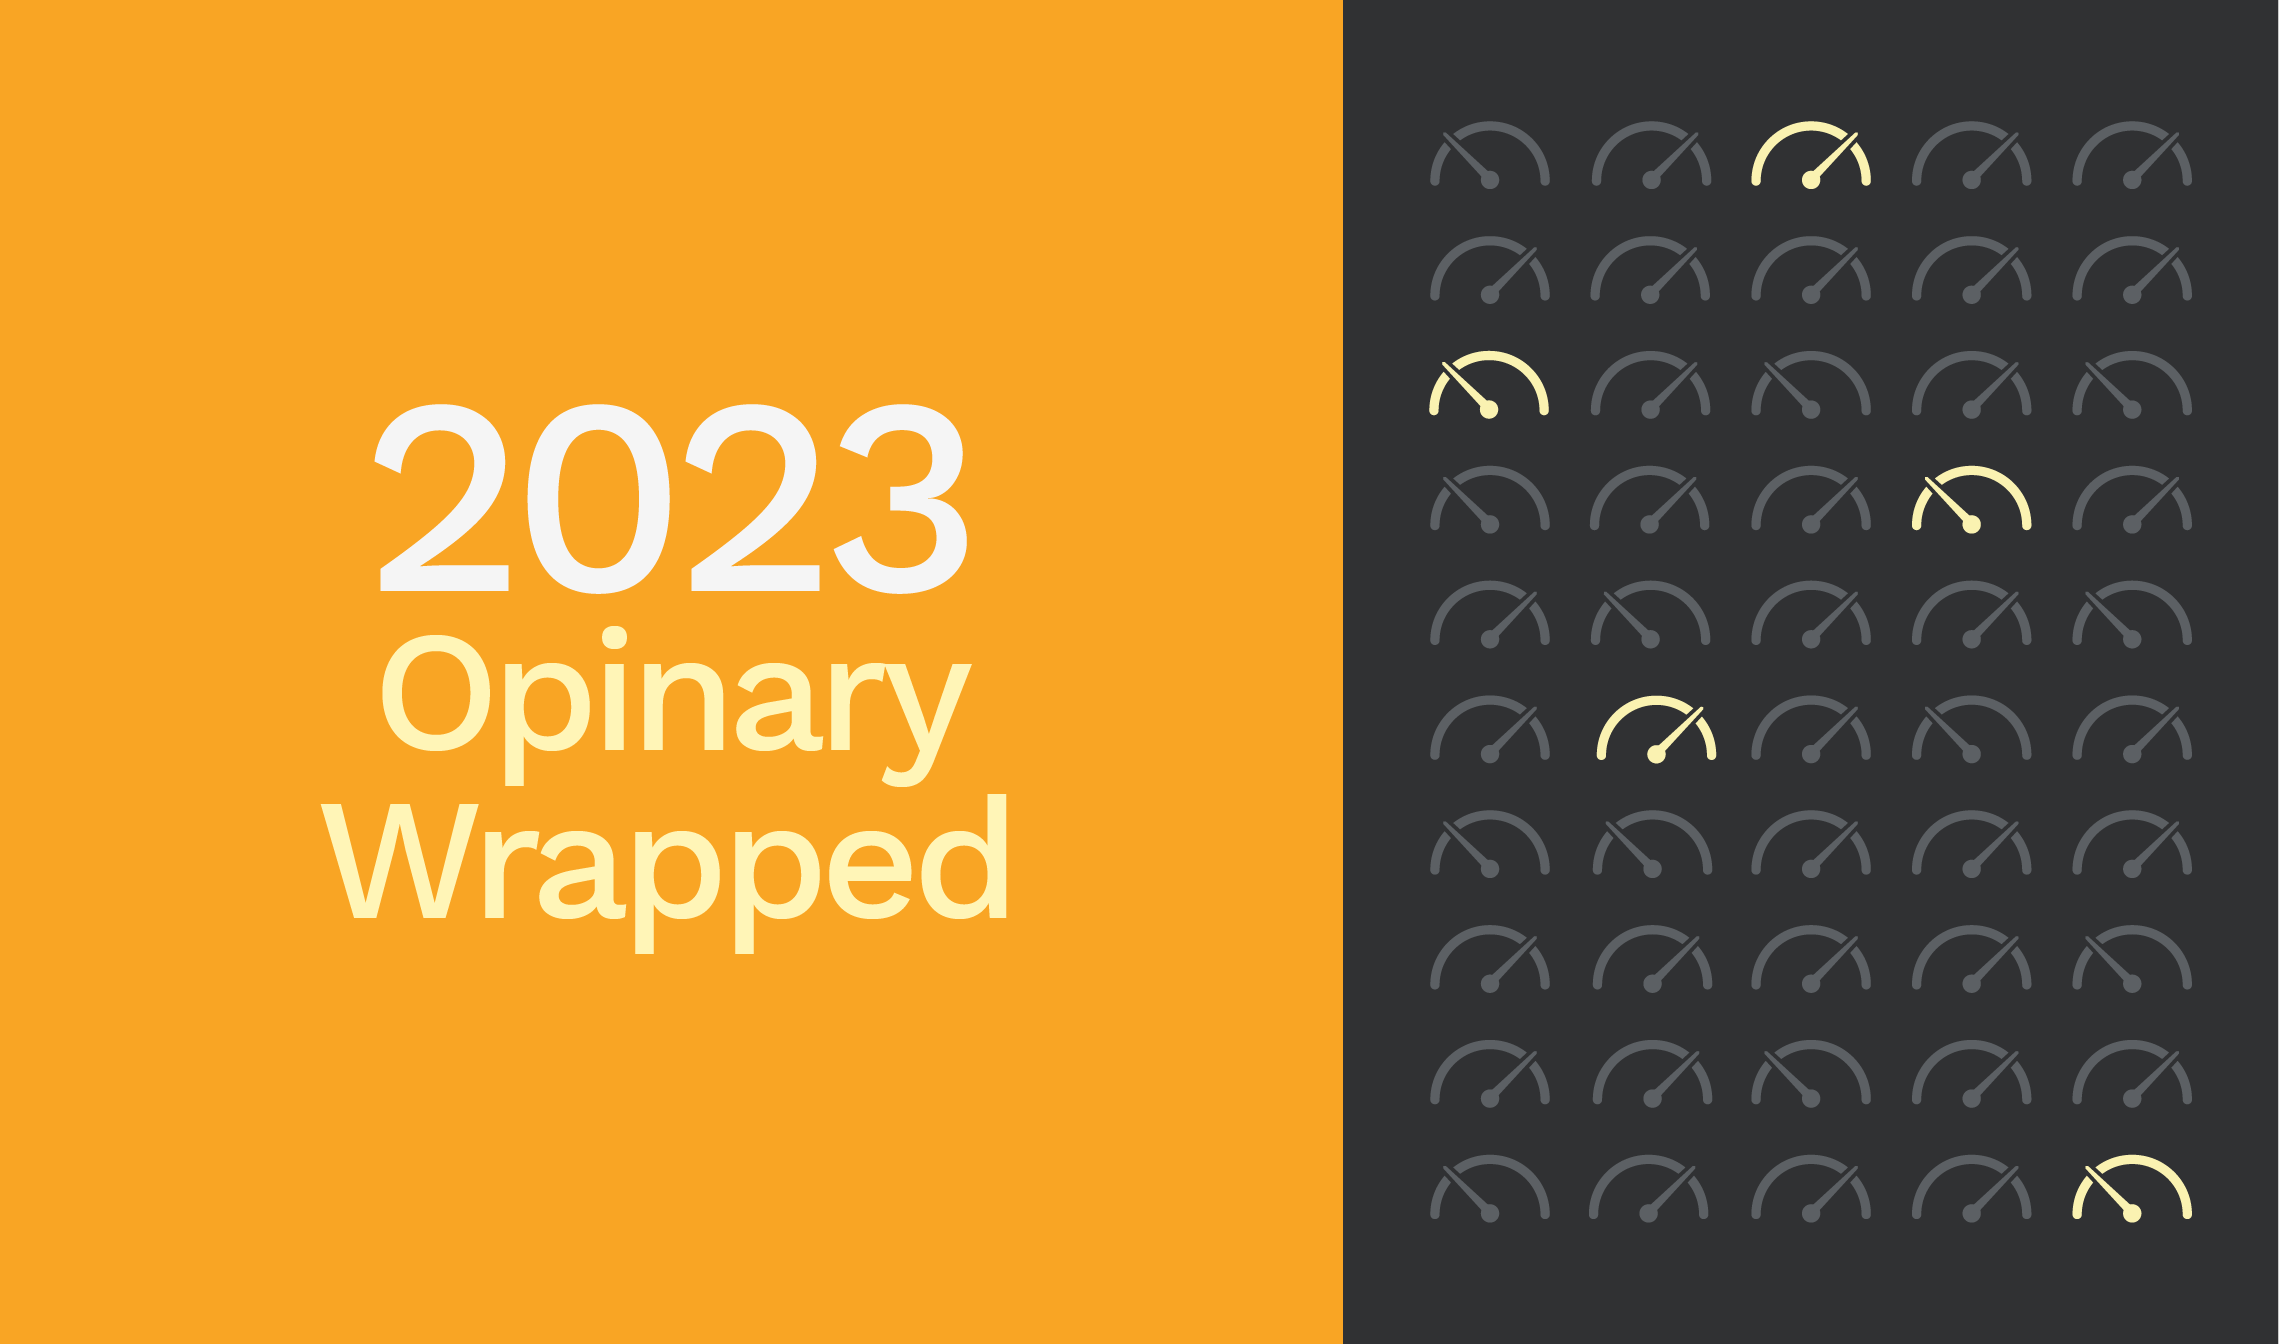 Opinary Wrapped 2023